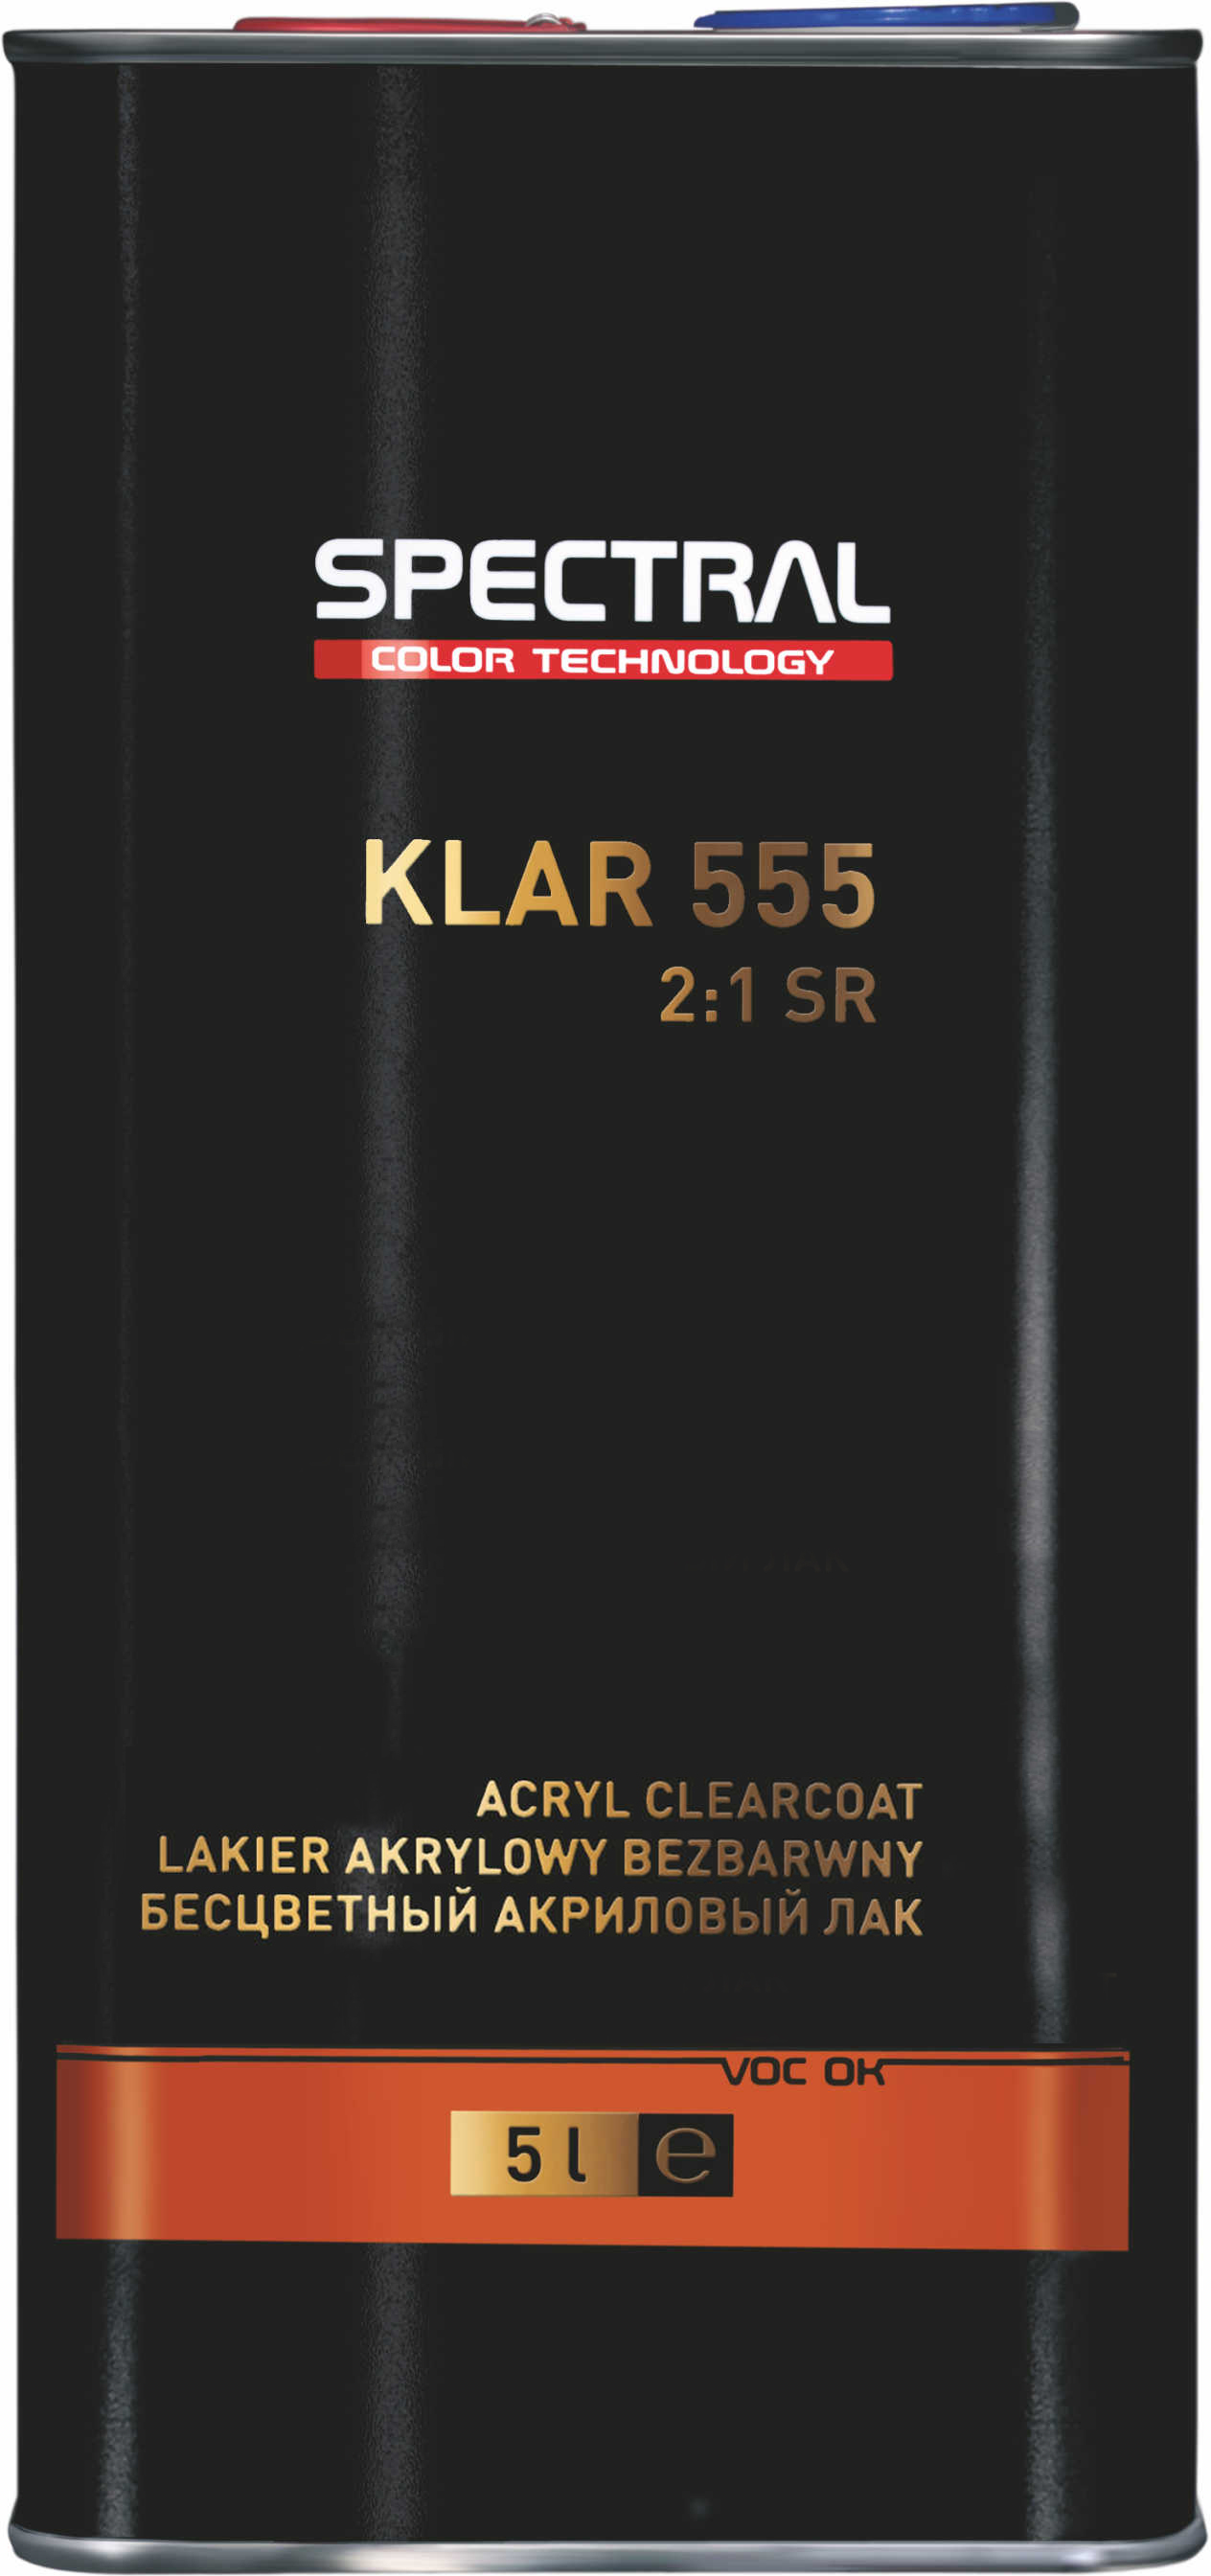 KLAR 555 - Two-component clearcoat with increased scratch resistance (SR)